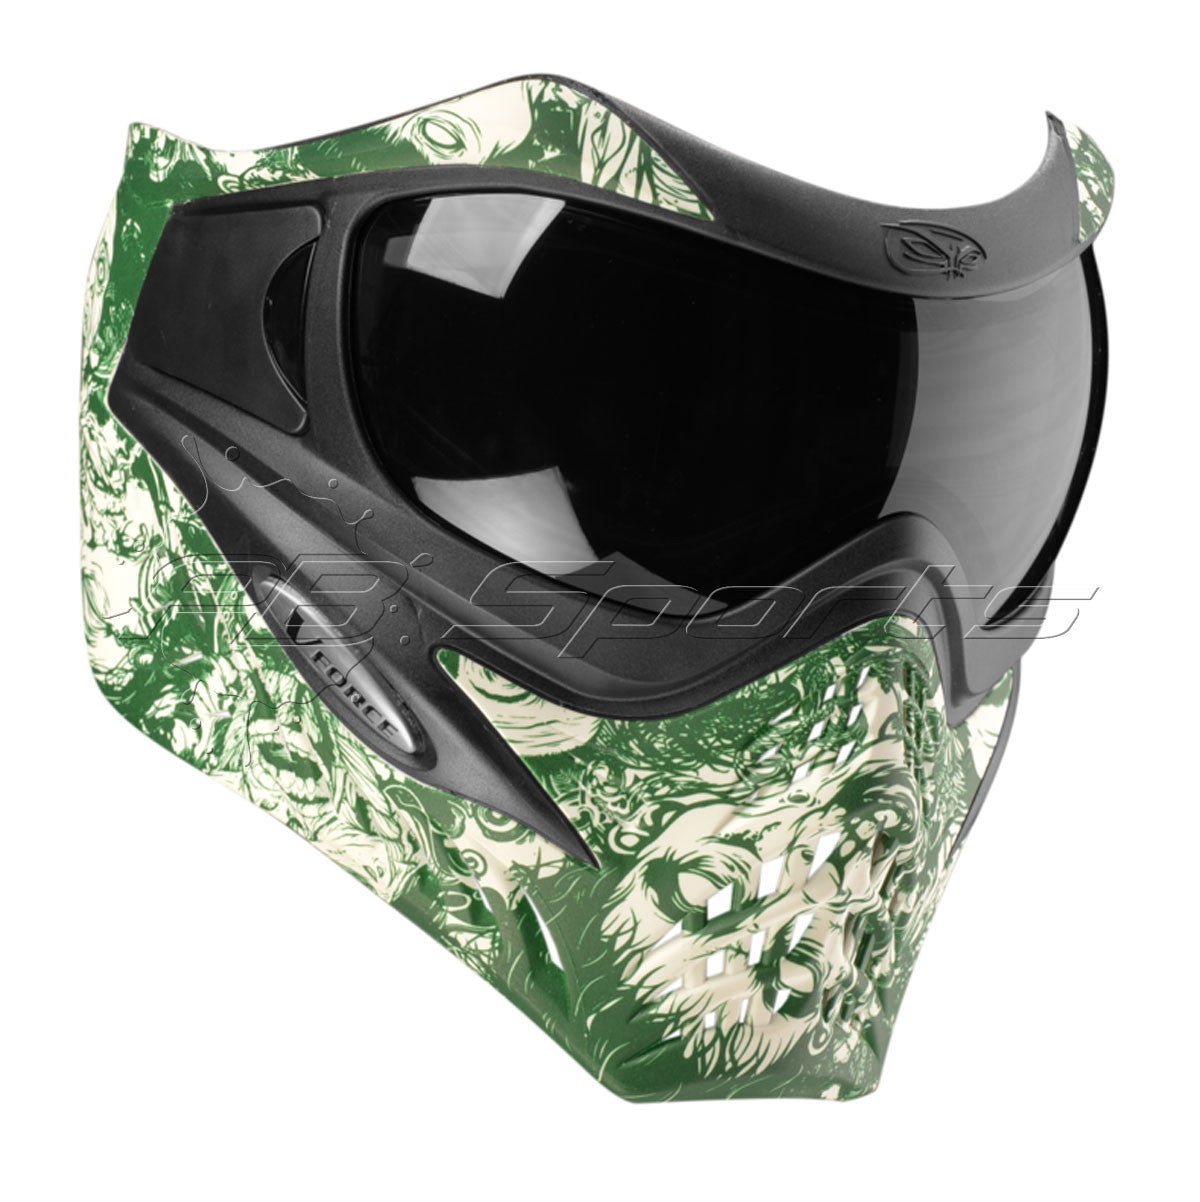 VForce Grill SE - Zombies Green - V-Force